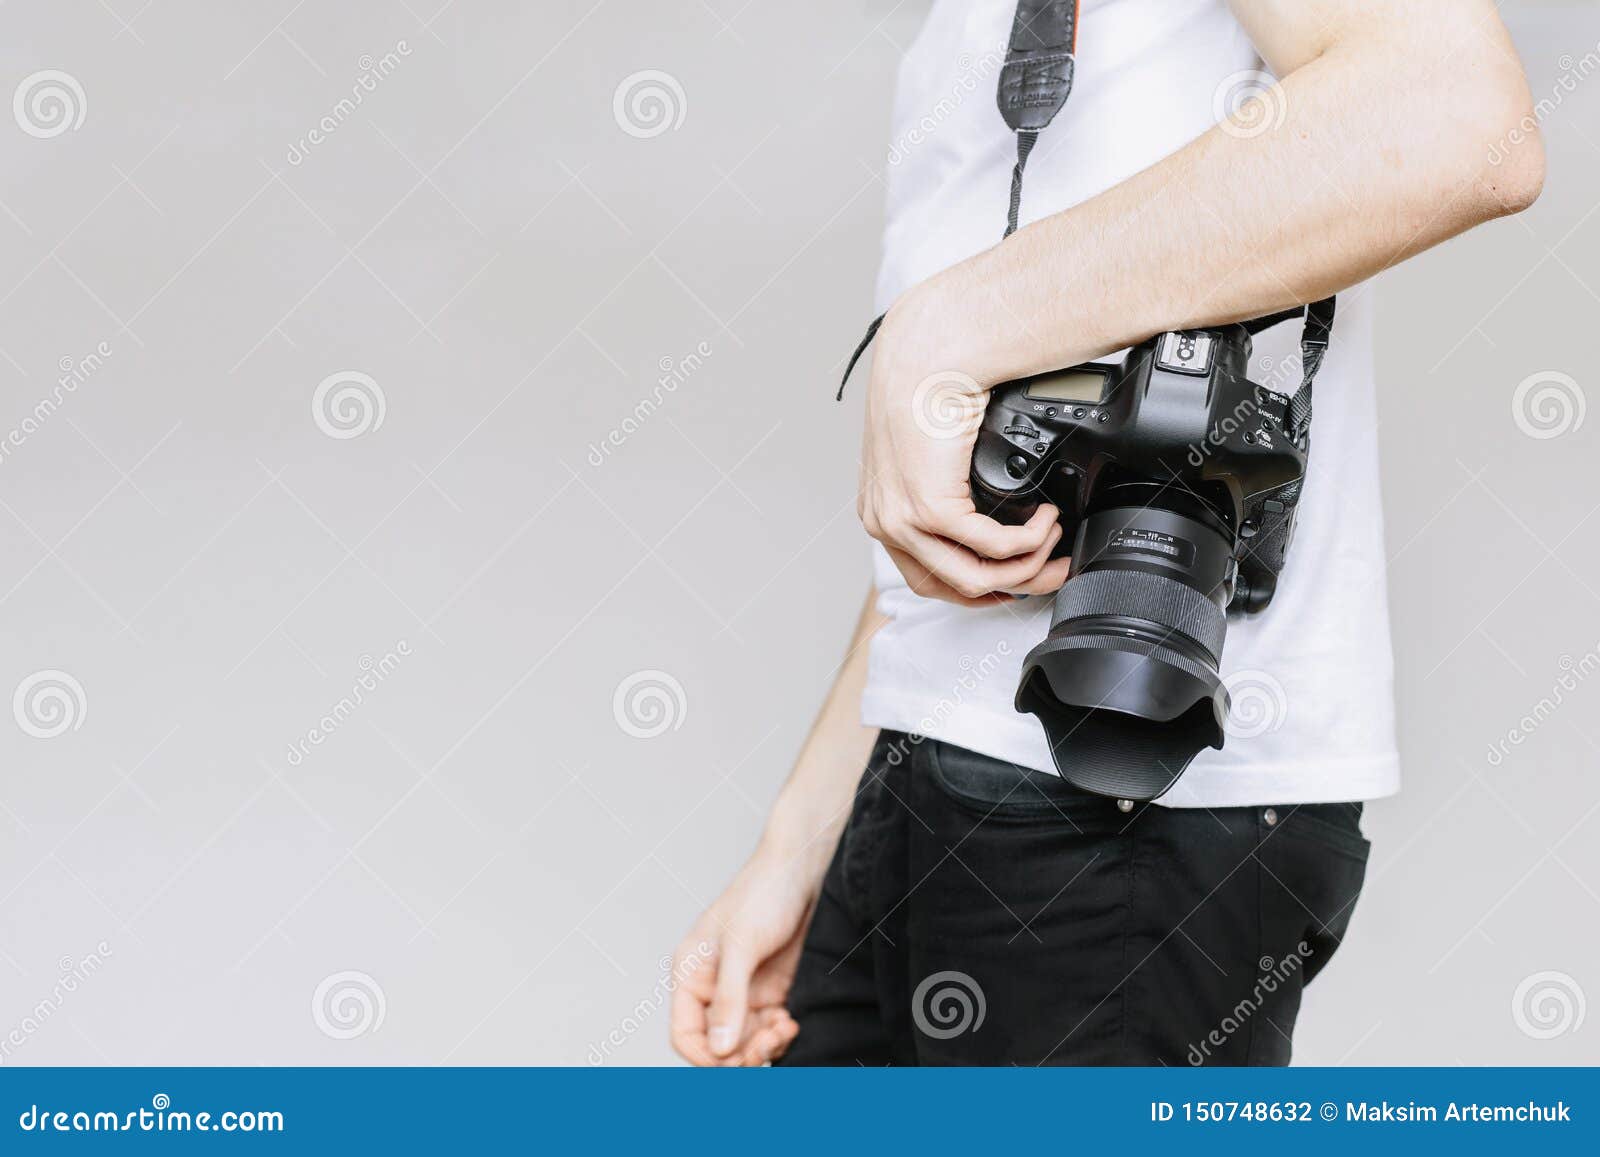 young man carries a photo camera on his shoulder.  gray background